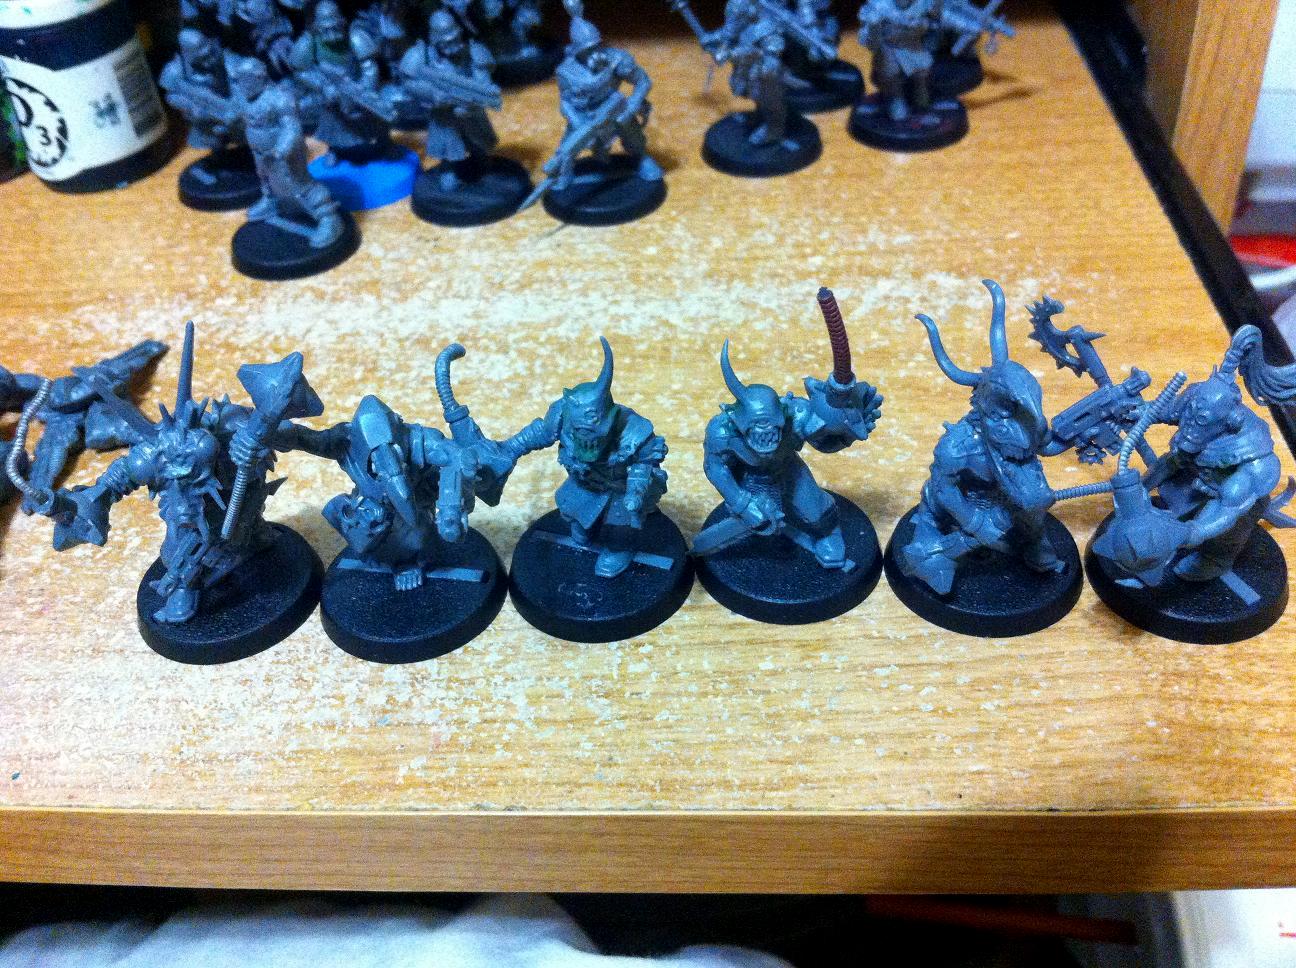 Traitor Guard, Demo pack suicide soldiers